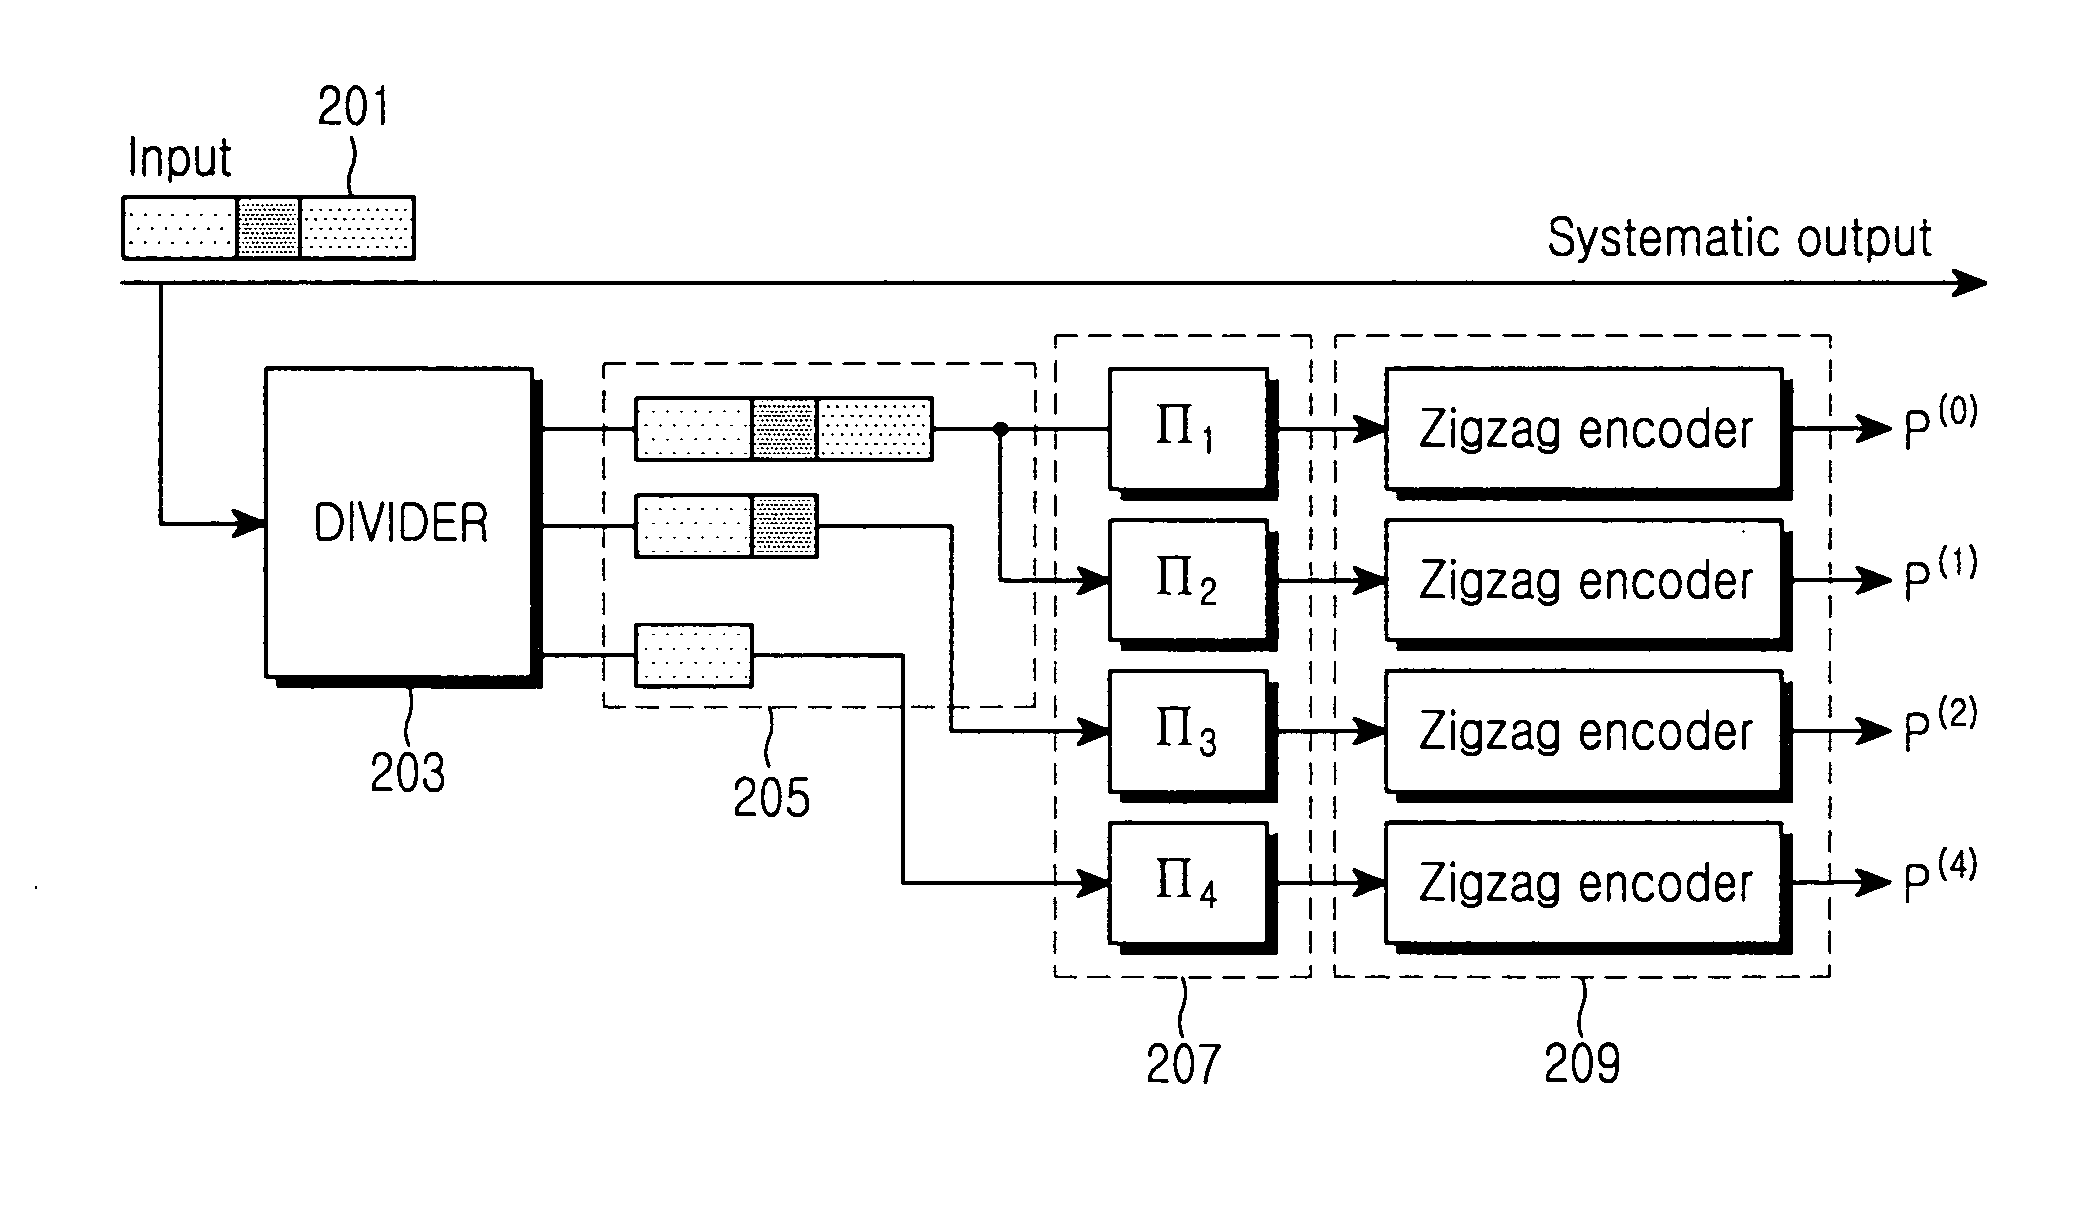 Apparatus and method for generating low density parity check code using zigzag code in a communication system